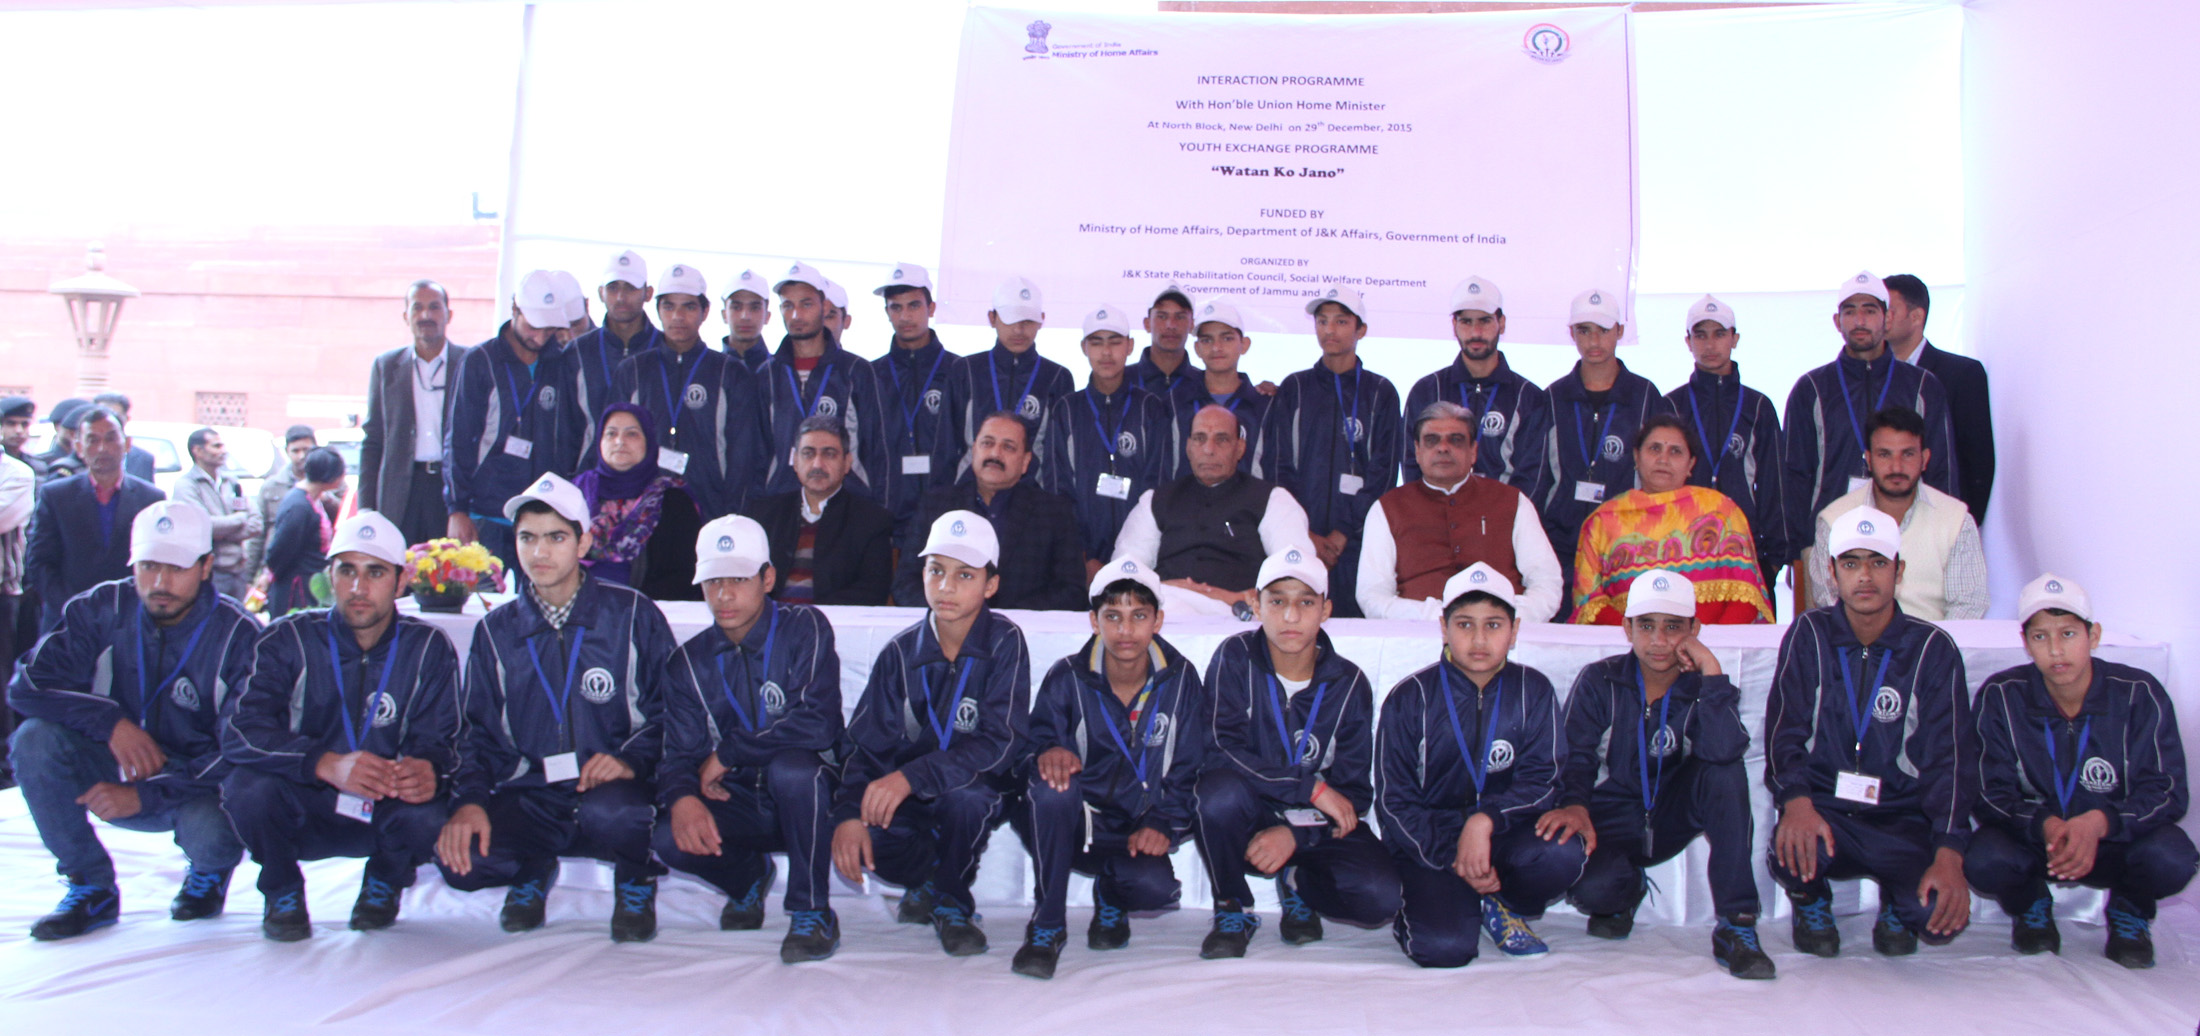 The Union Home Minister, Shri Rajnath Singh in a group photograph with the youth from the state of Jammu and Kashmir under Wattan Ko Jano initiative of the Ministry of Home Affairs, in New Delhi on December 29, 2015.  	The Minister of State for Development of North Eastern Region (I/C), Prime Ministers Office, Personnel, Public Grievances & Pensions, Department of Atomic Energy, Department of Space, Dr. Jitendra Singh and the Minister of State for Home Affairs, Shri Haribhai Parthibhai Chaudhary are also seen.